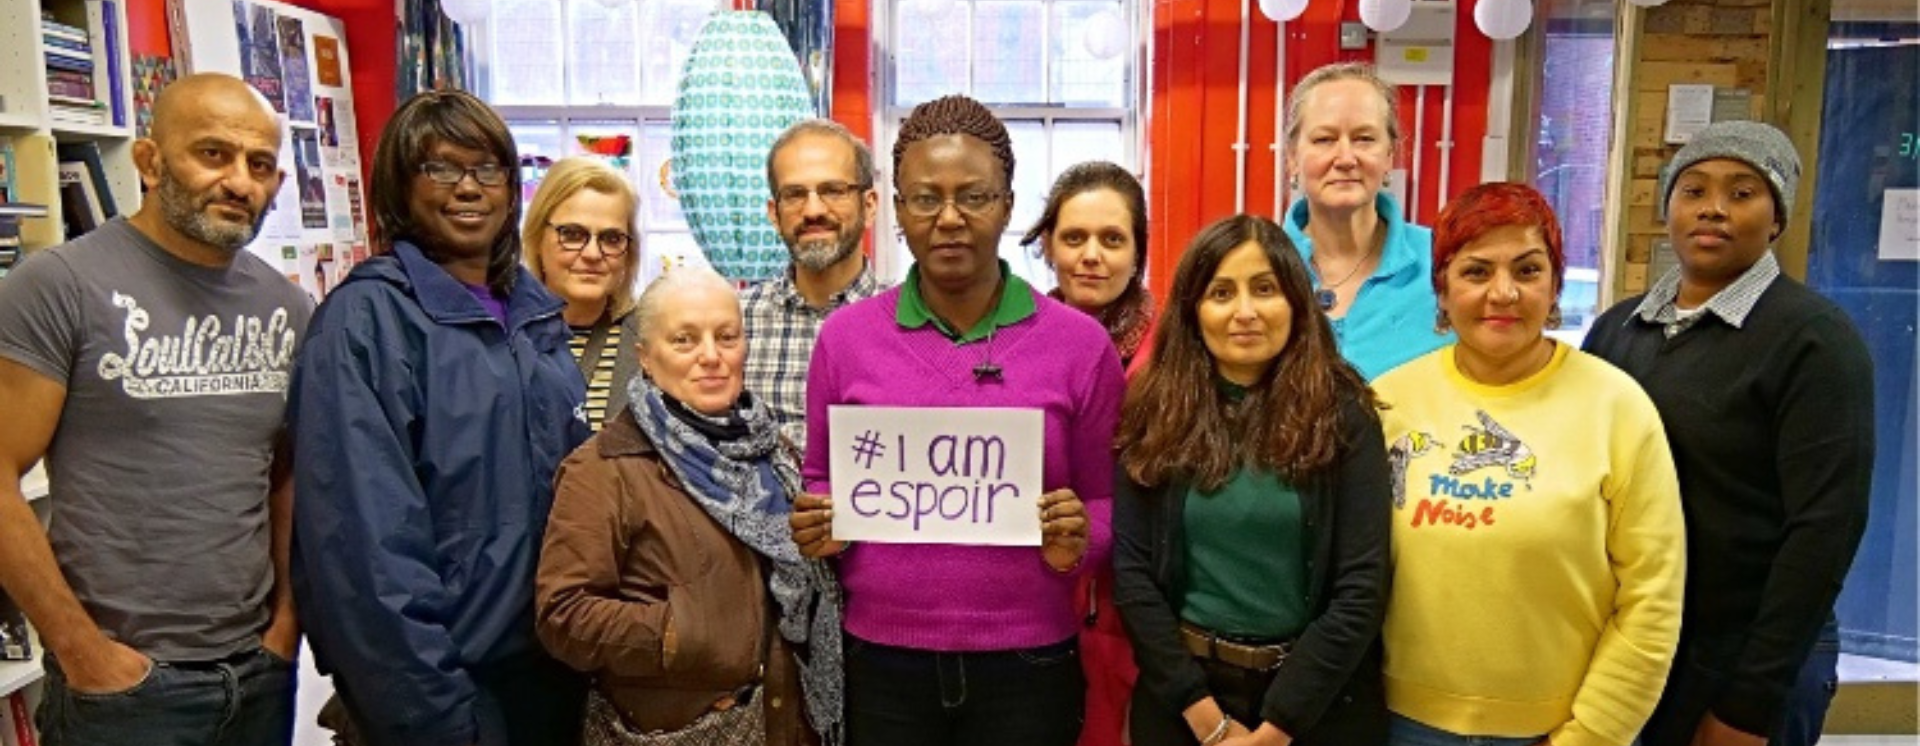 Migrant Voice members gather for the # I am Espoir campaign